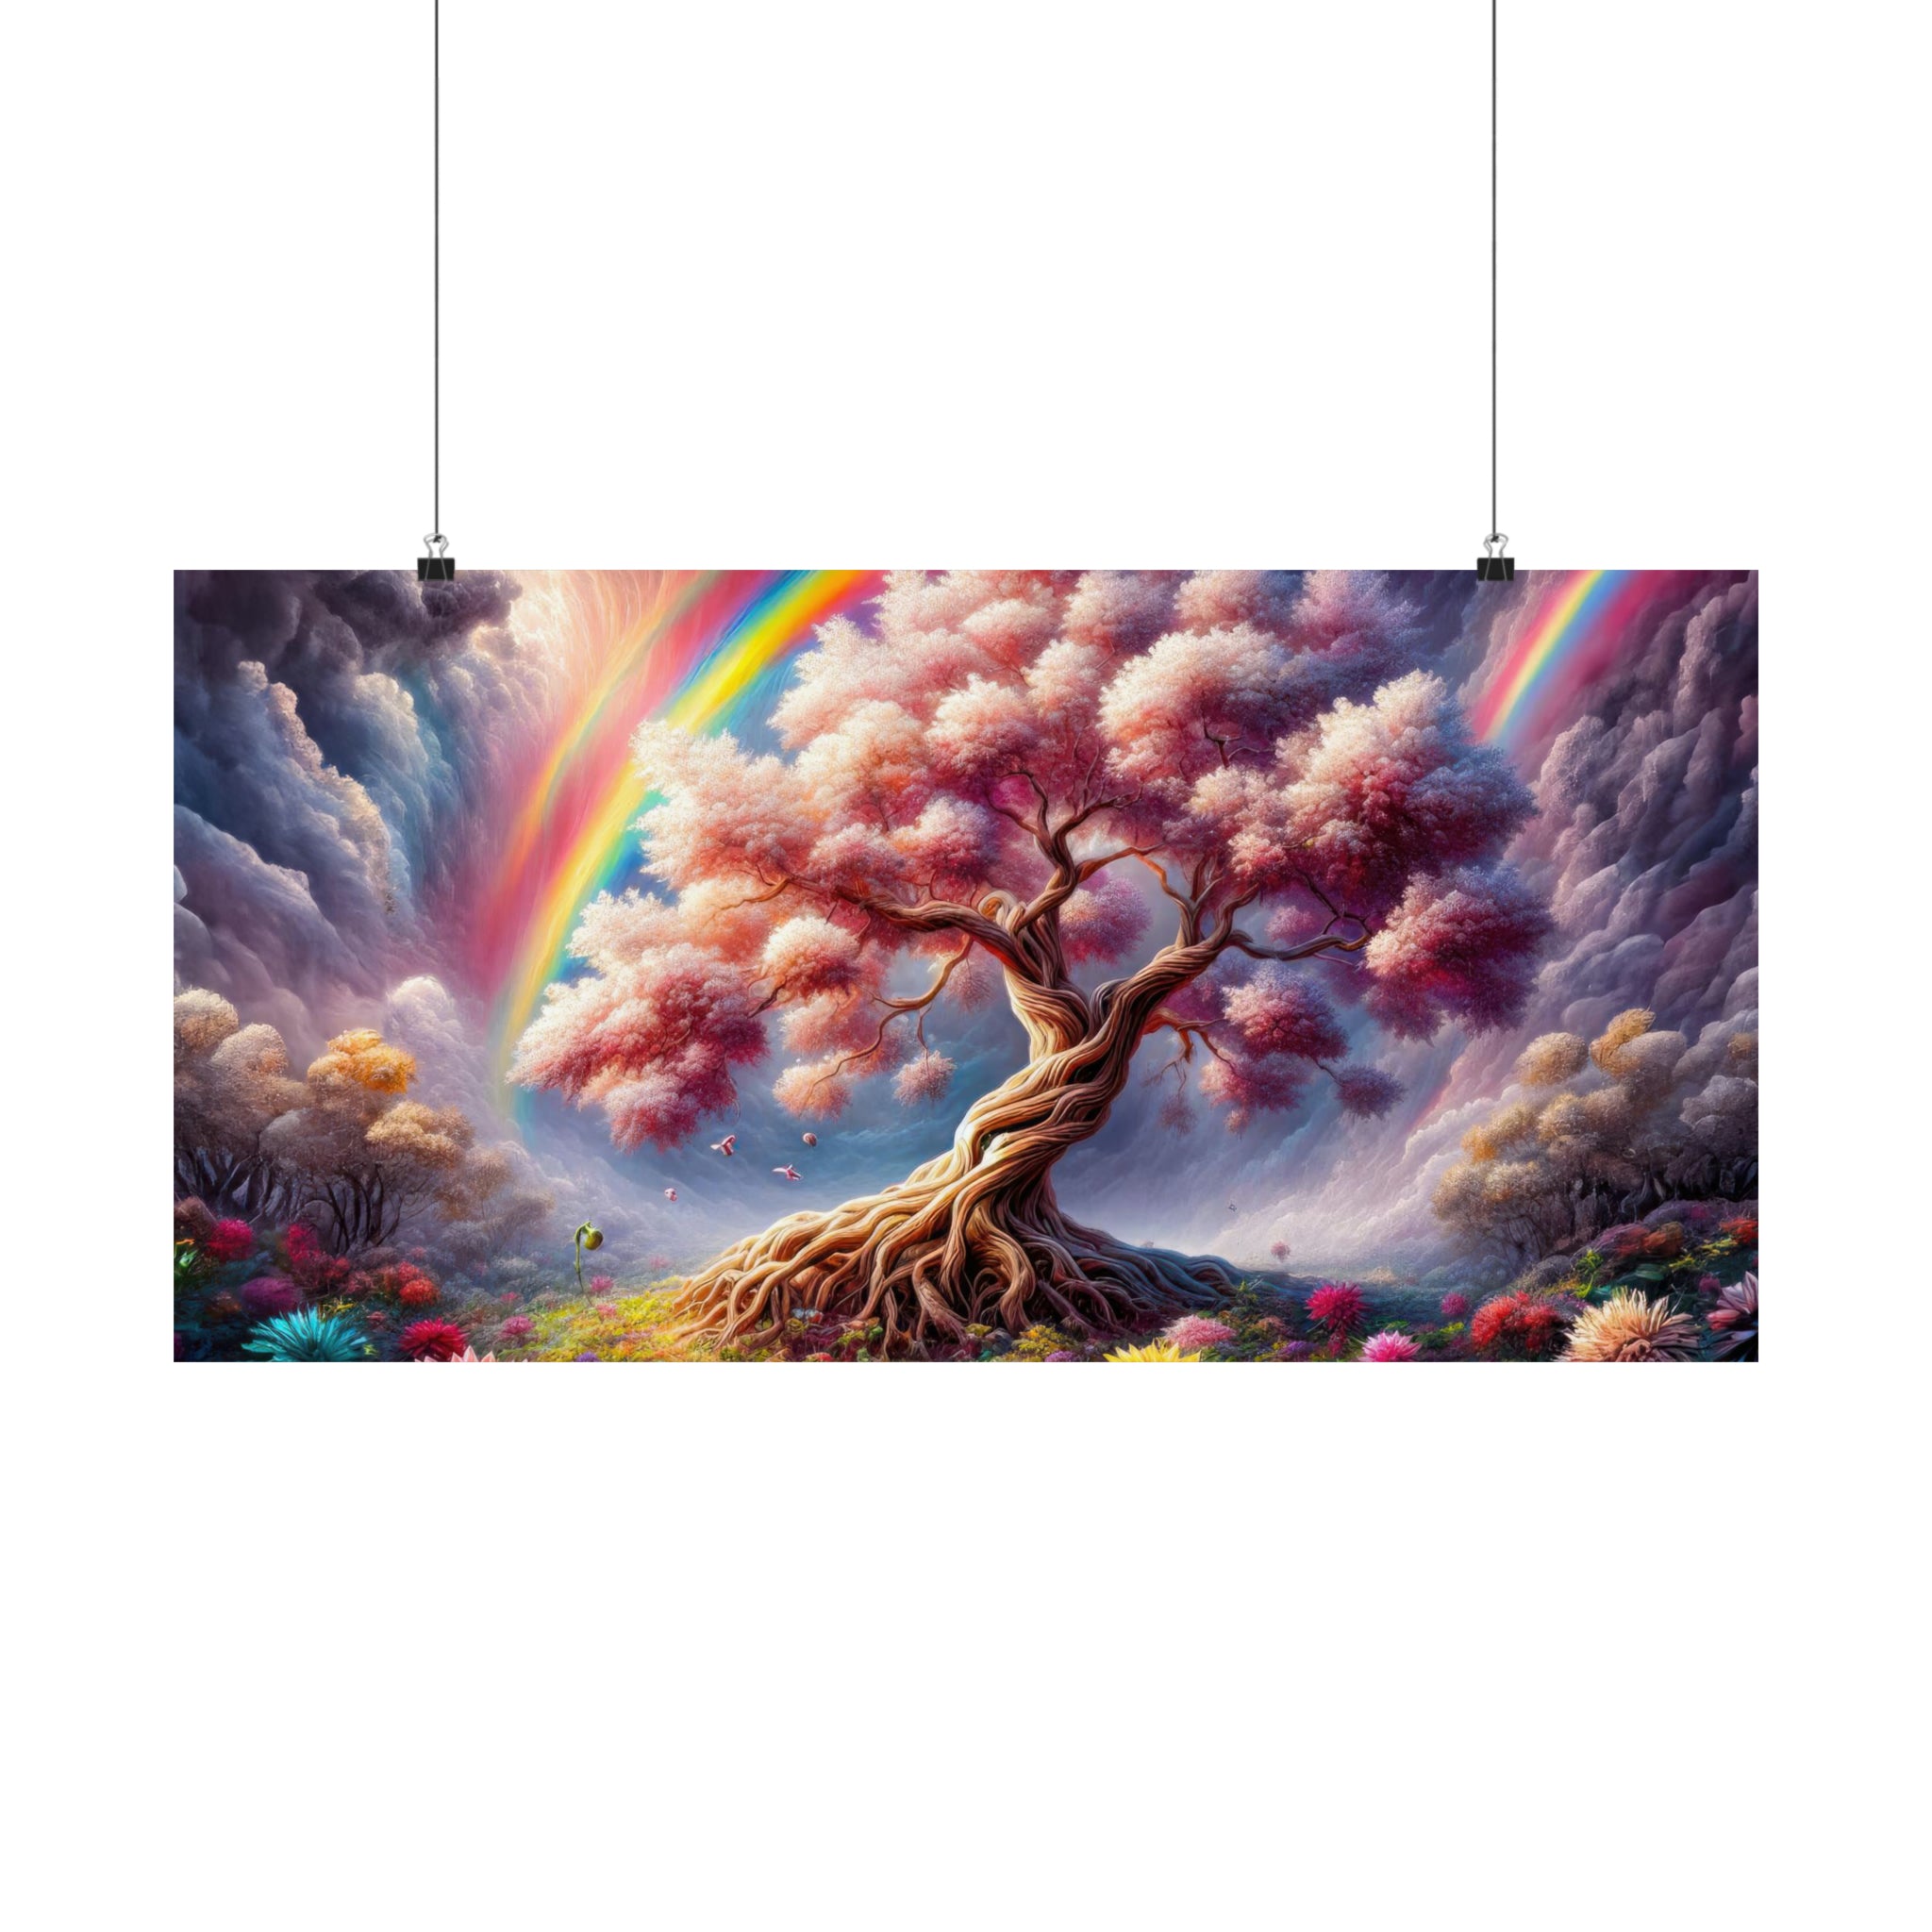 The Tree of Hues Poster